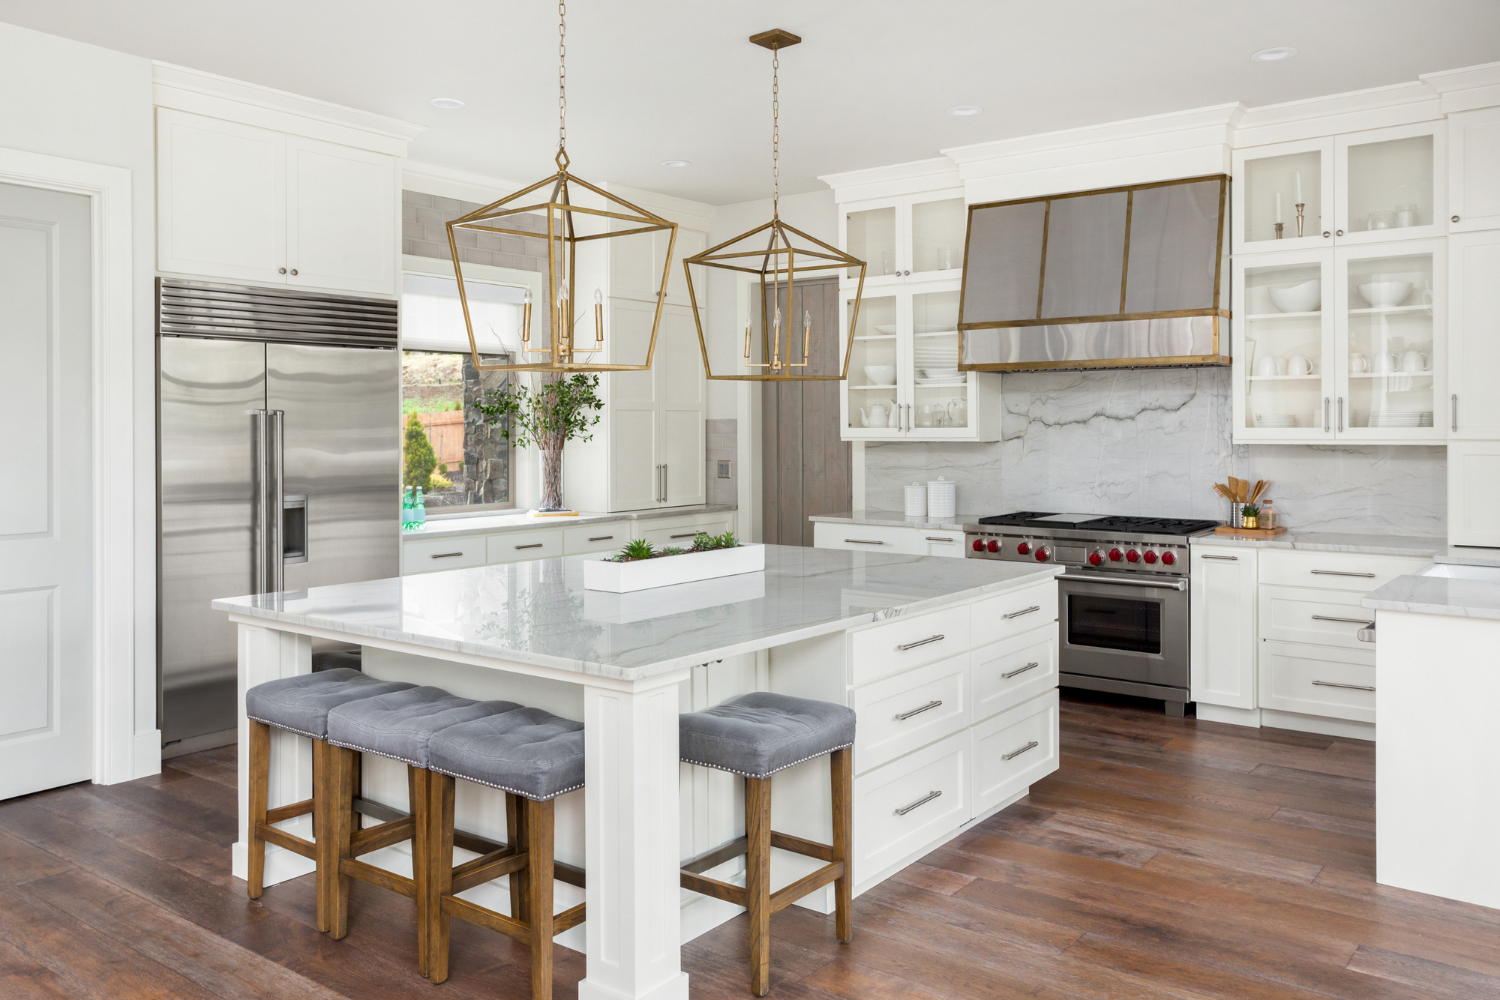 full-service-interior-designer-new-construction-torrance-ca-design-answers-to-questions-luxury-kitchen-large-island-with-bar-stools-custom-range-hood-white-cabinets-transitional-home-staging